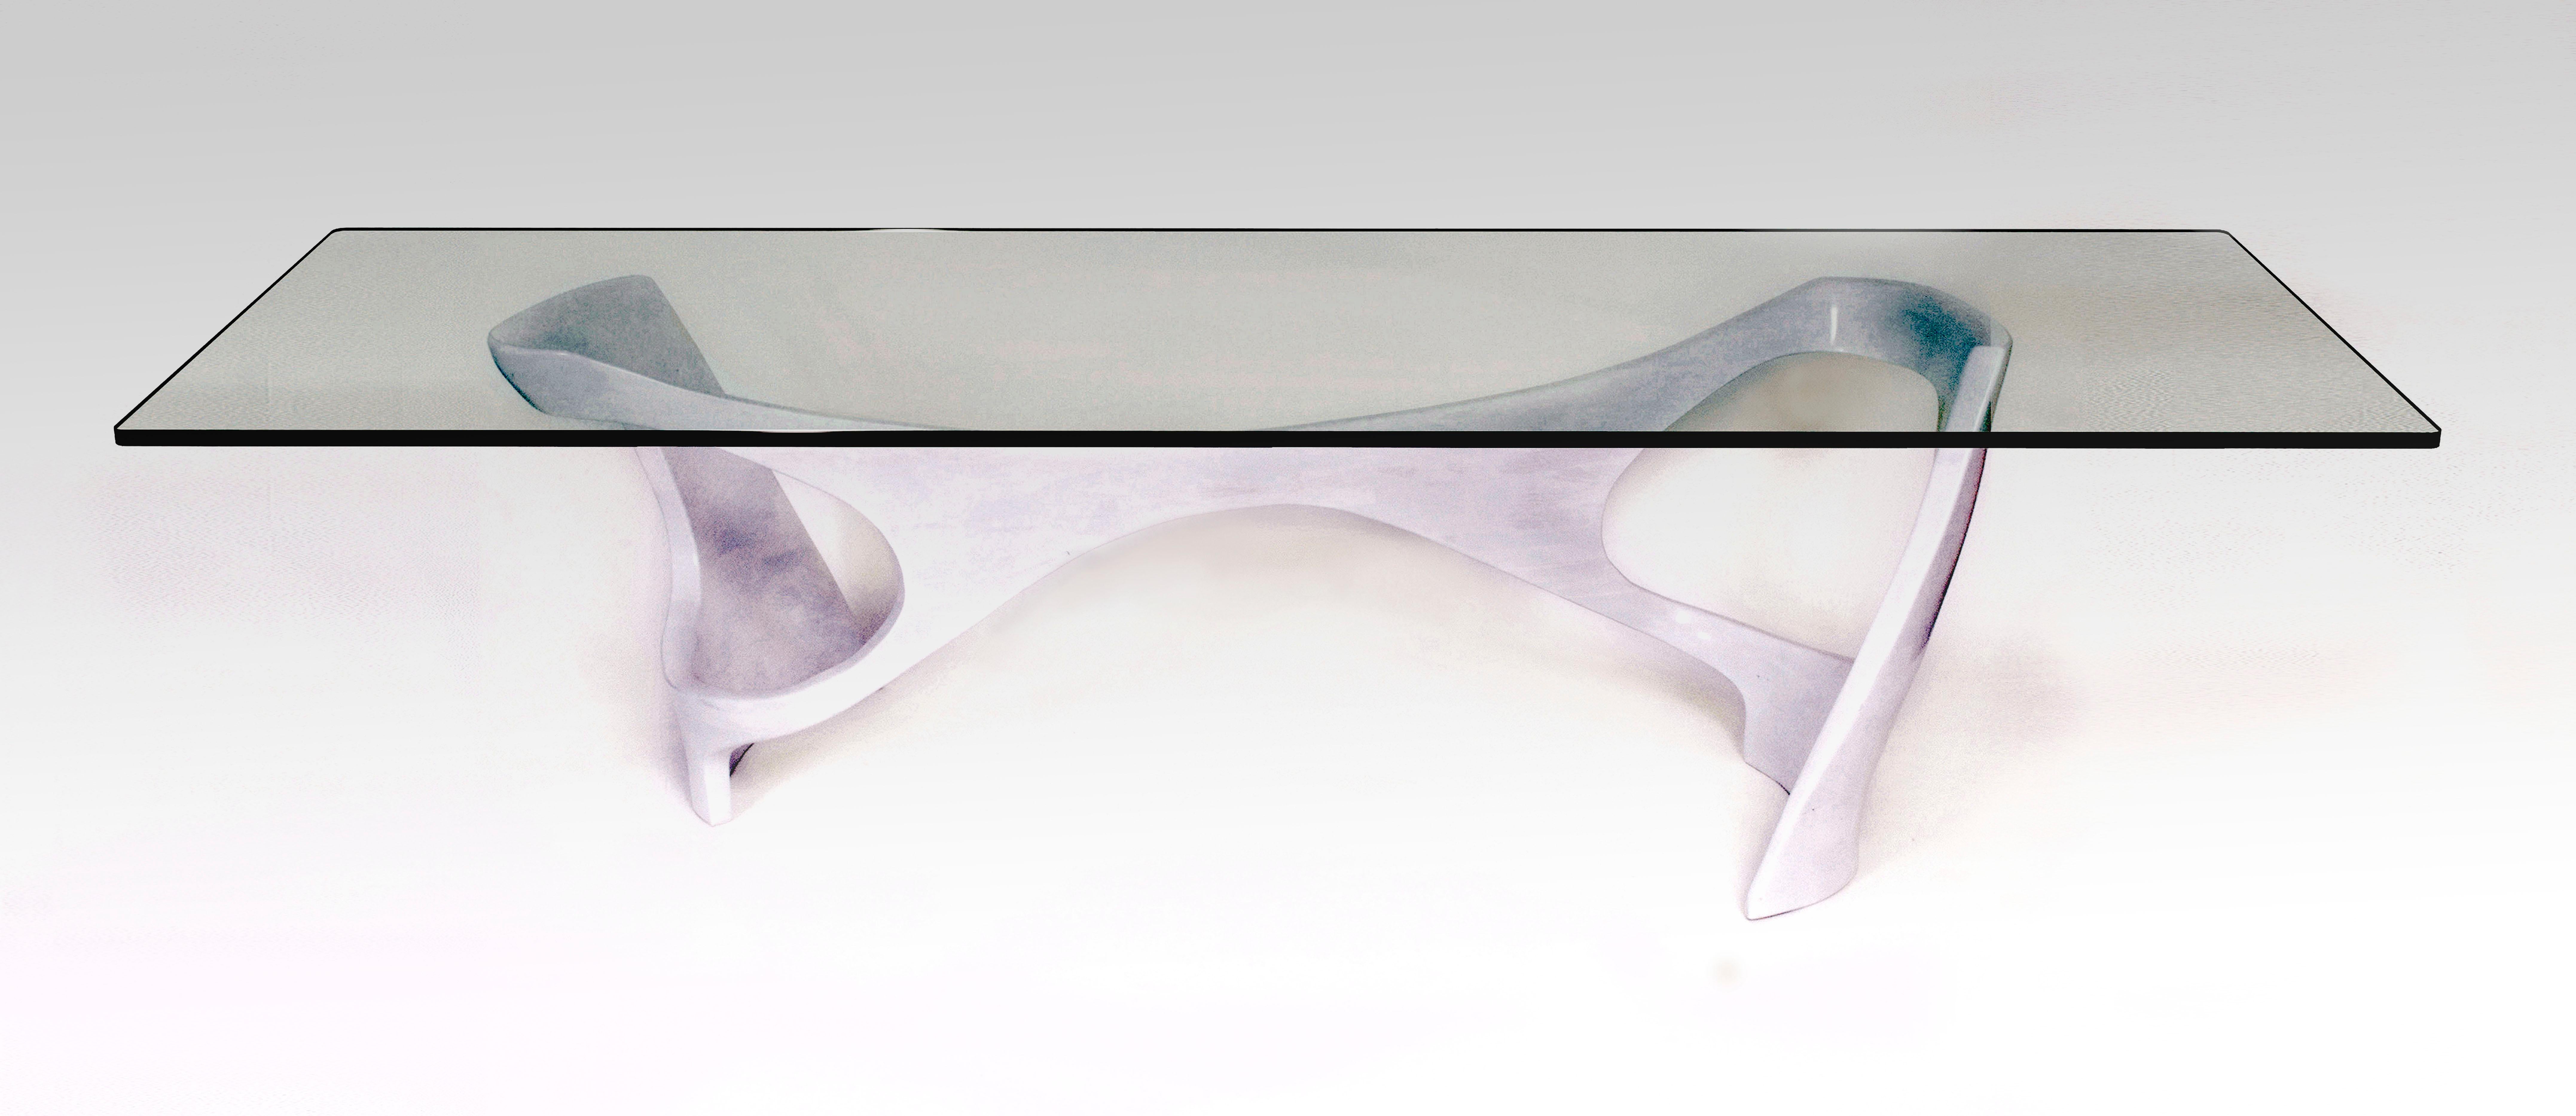 The N2 dining table features a minimal, serpentine base supporting a thick, glass top with 1